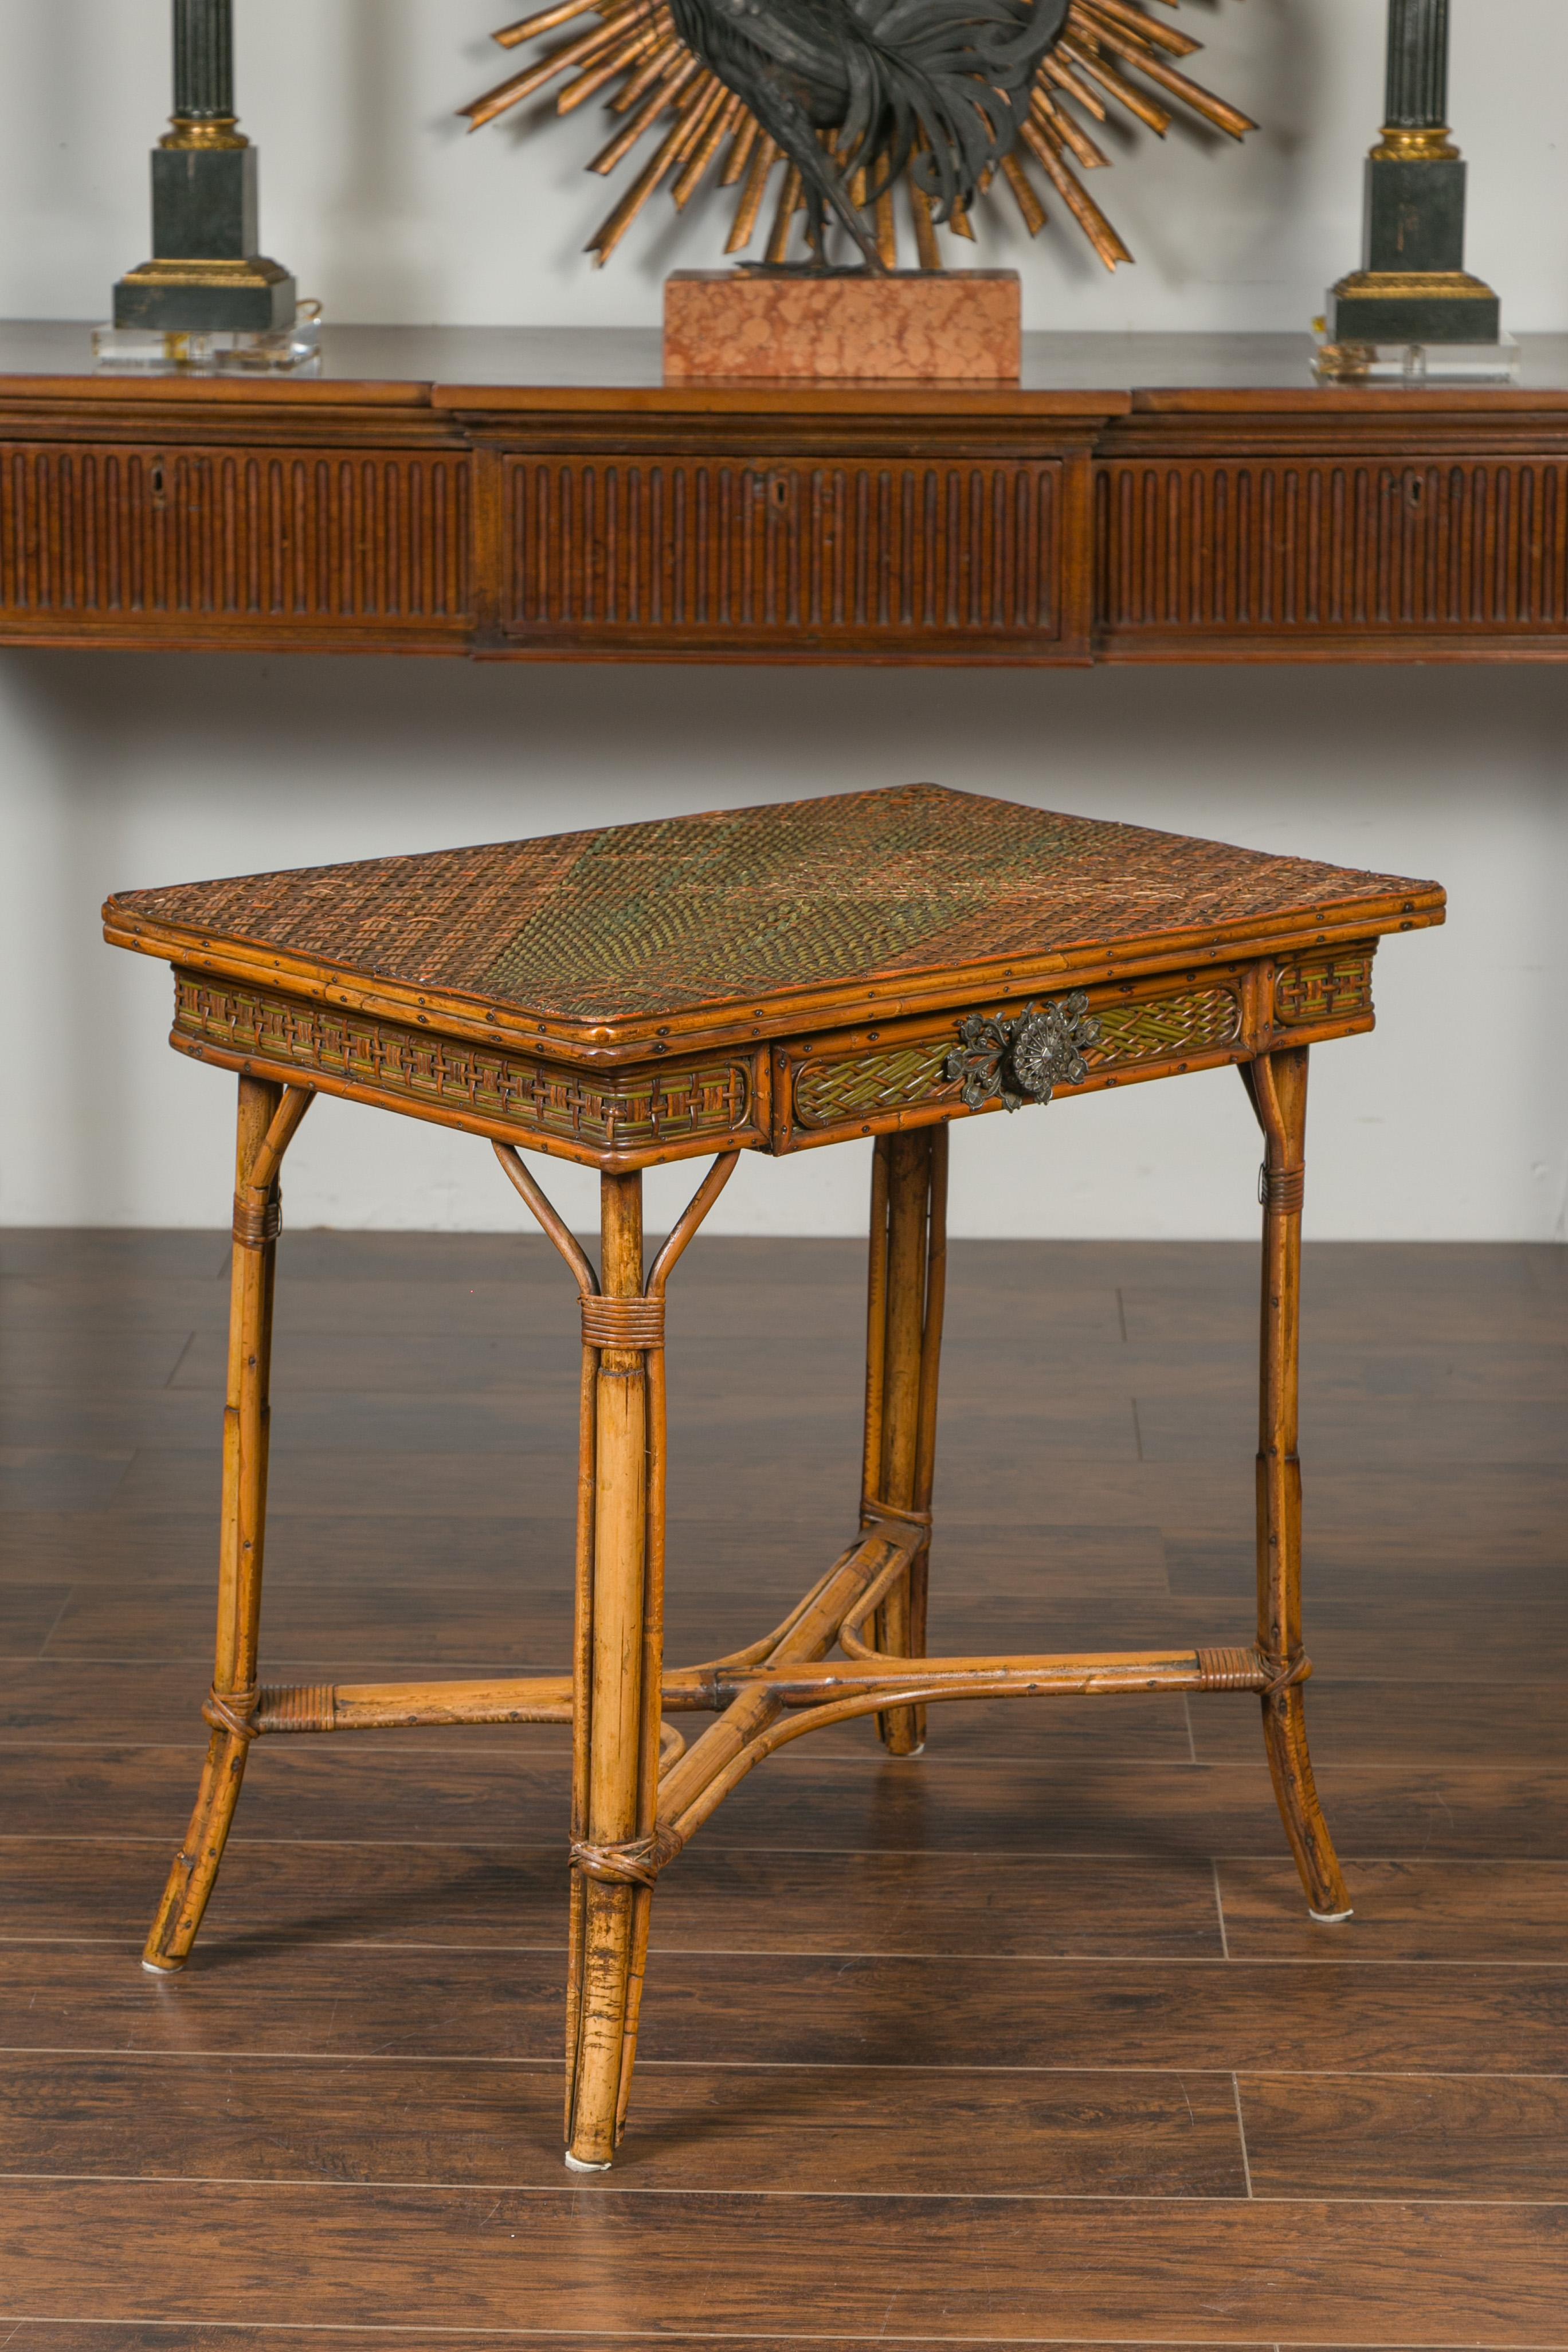 20th Century English 1900s Bamboo Side Table with Two-Toned Rattan Top and Ornate Hardware